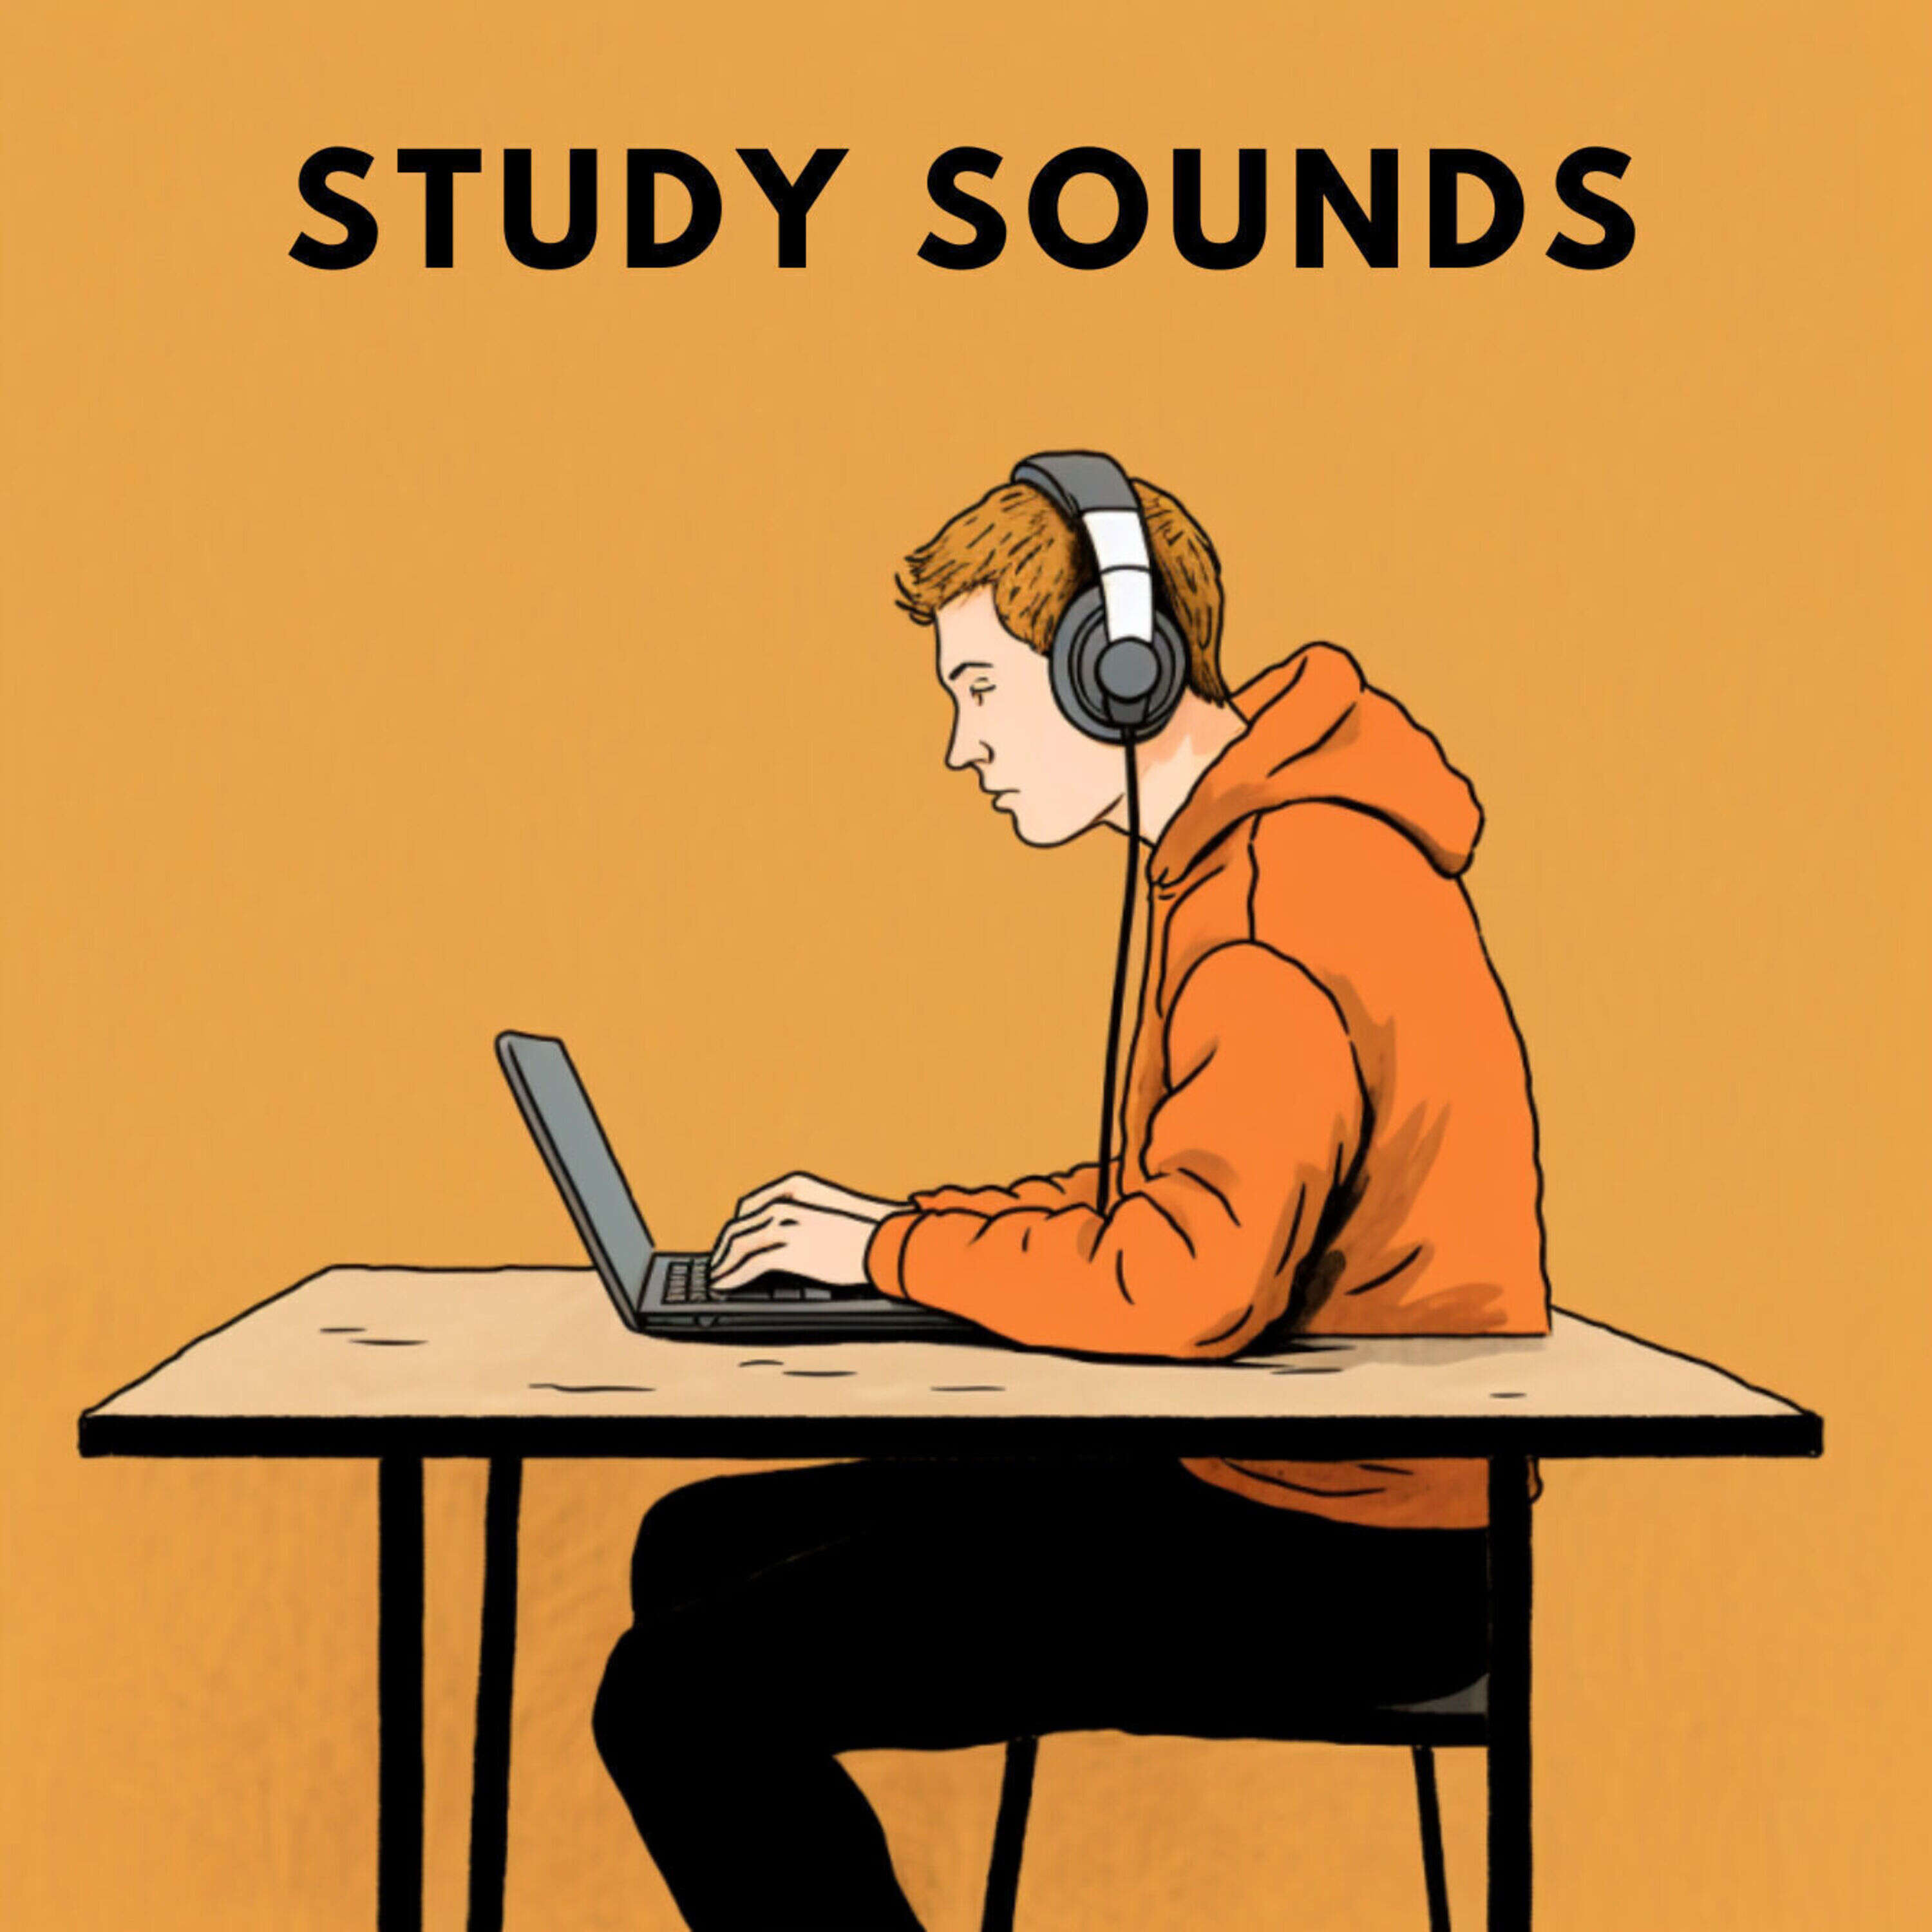 ADHD Relief sounds: Studying sounds for Better Concentration and Focus, Study sounds